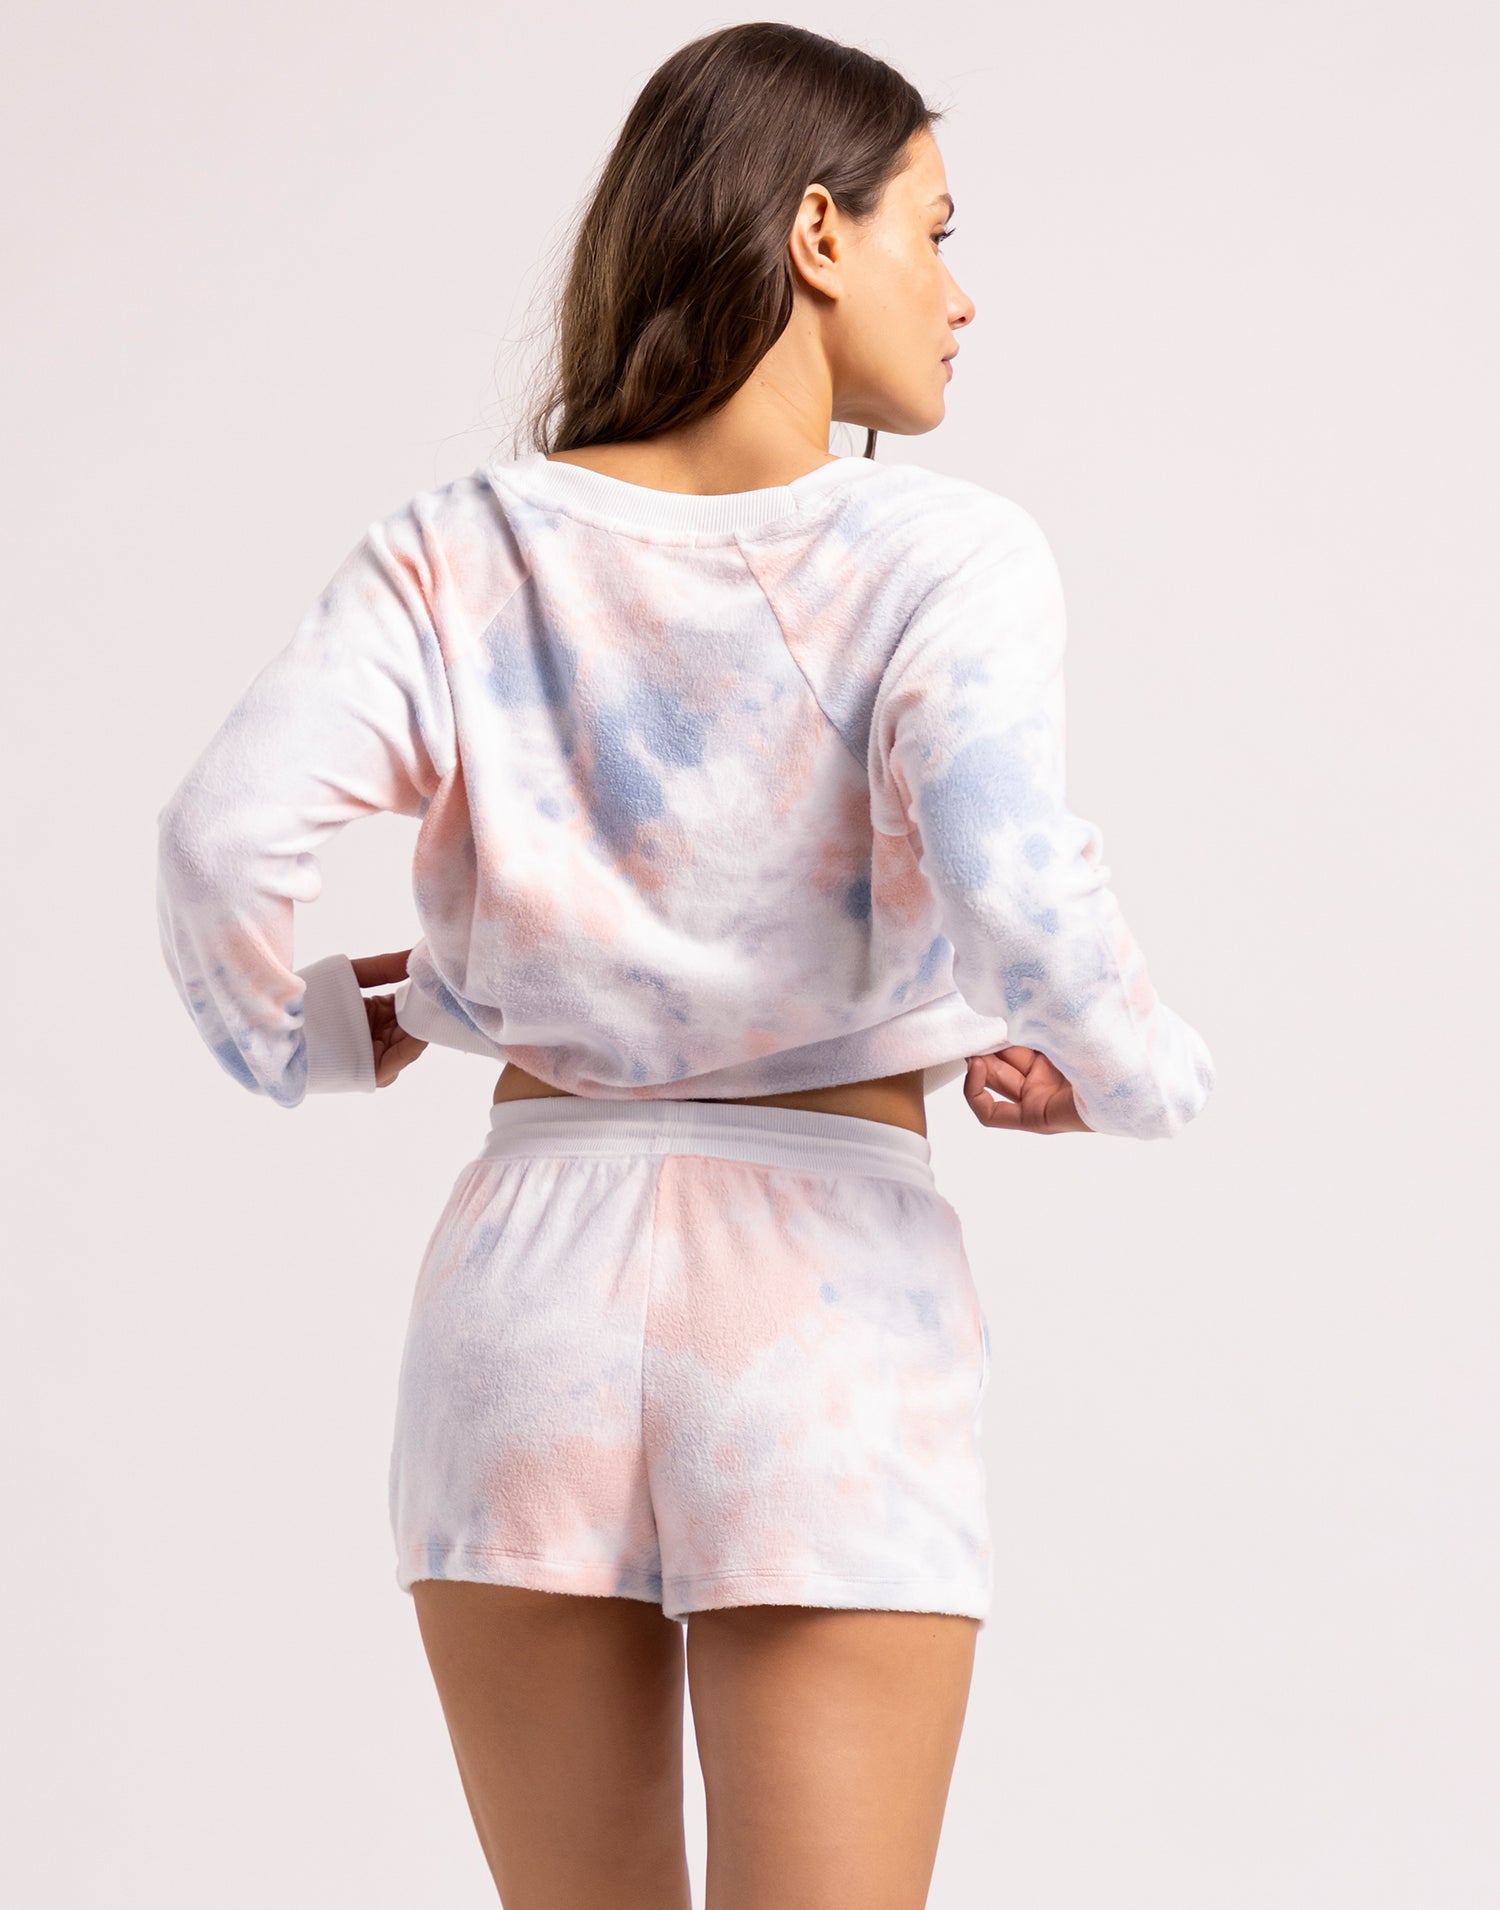 Candy Skies Tie Dye Long Sleeve Lounge Top by Z Supply in Cloud Dancer - Back View